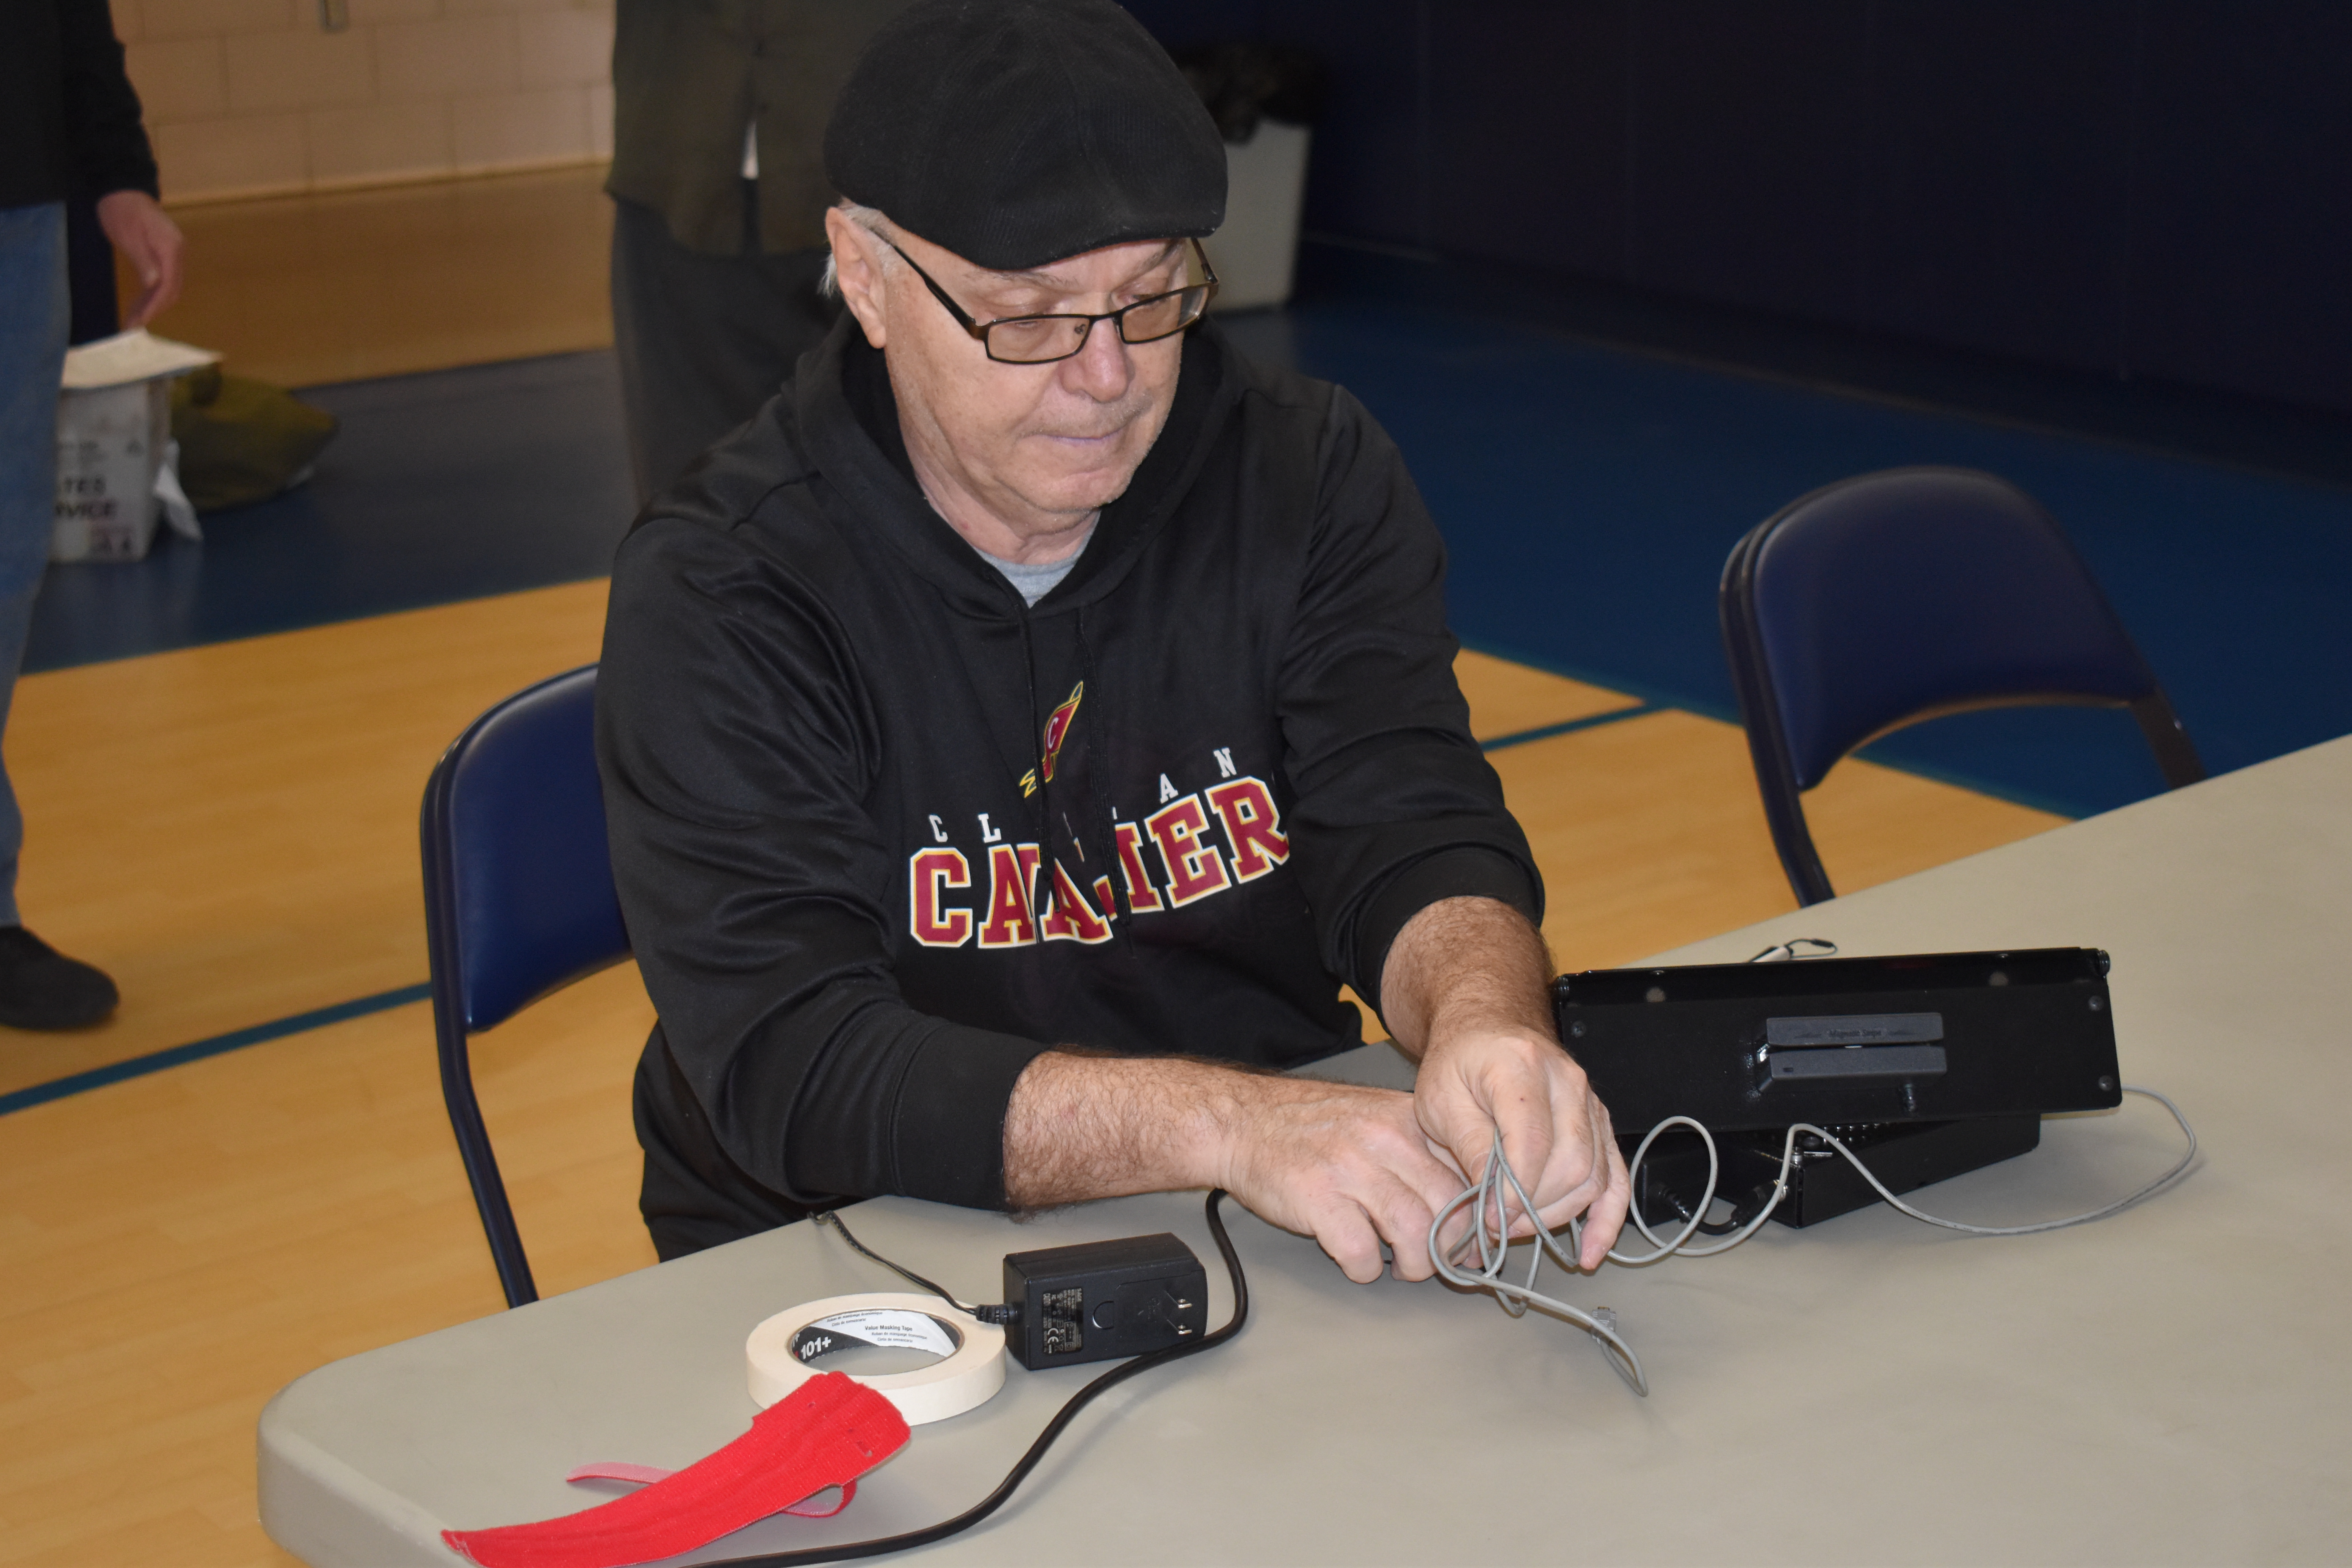 Mike D'Orio sets up electronic equipment in the gym at Brookfield Elementary School, where several Brookfield precincts vote. His work could be for naught as Gov. DeWine said he will seek to delay the election set for Tuesday, March 17, until June 2.